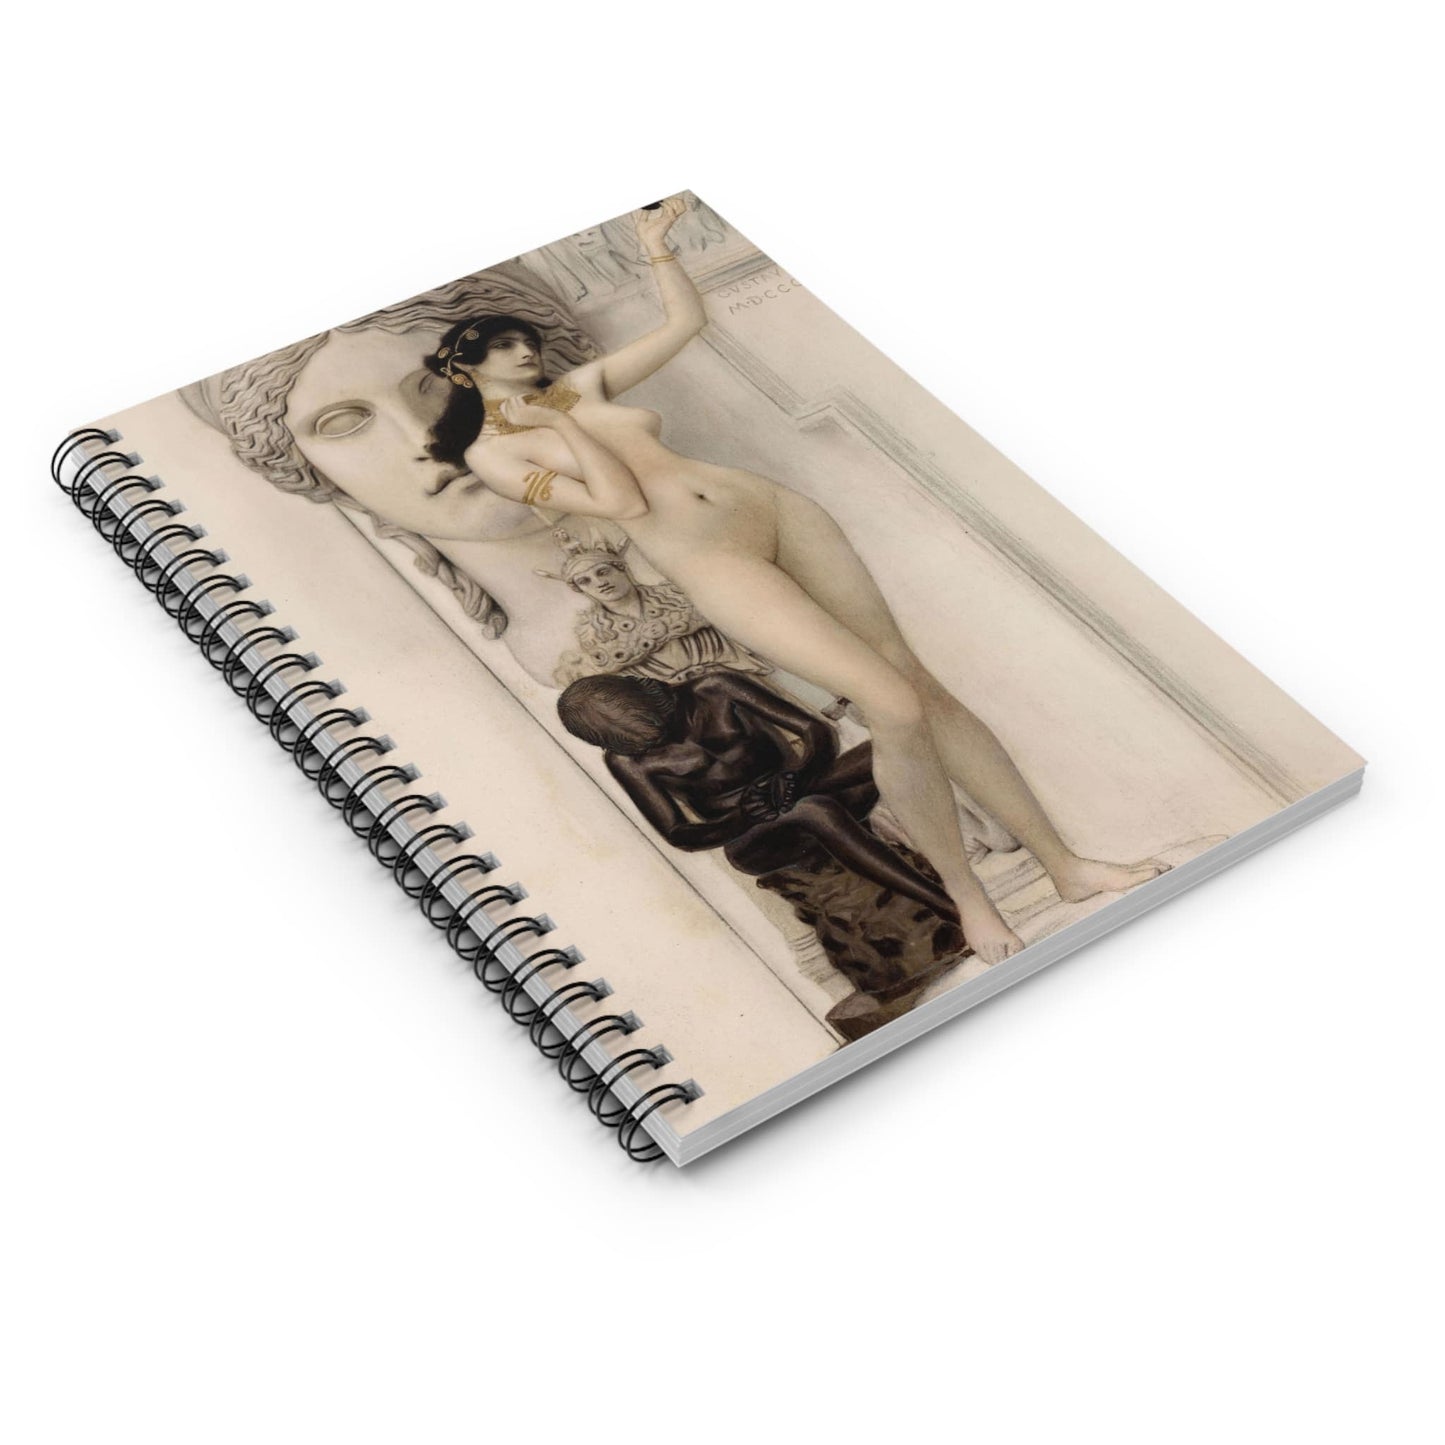 Gothic Spiral Notebook Laying Flat on White Surface